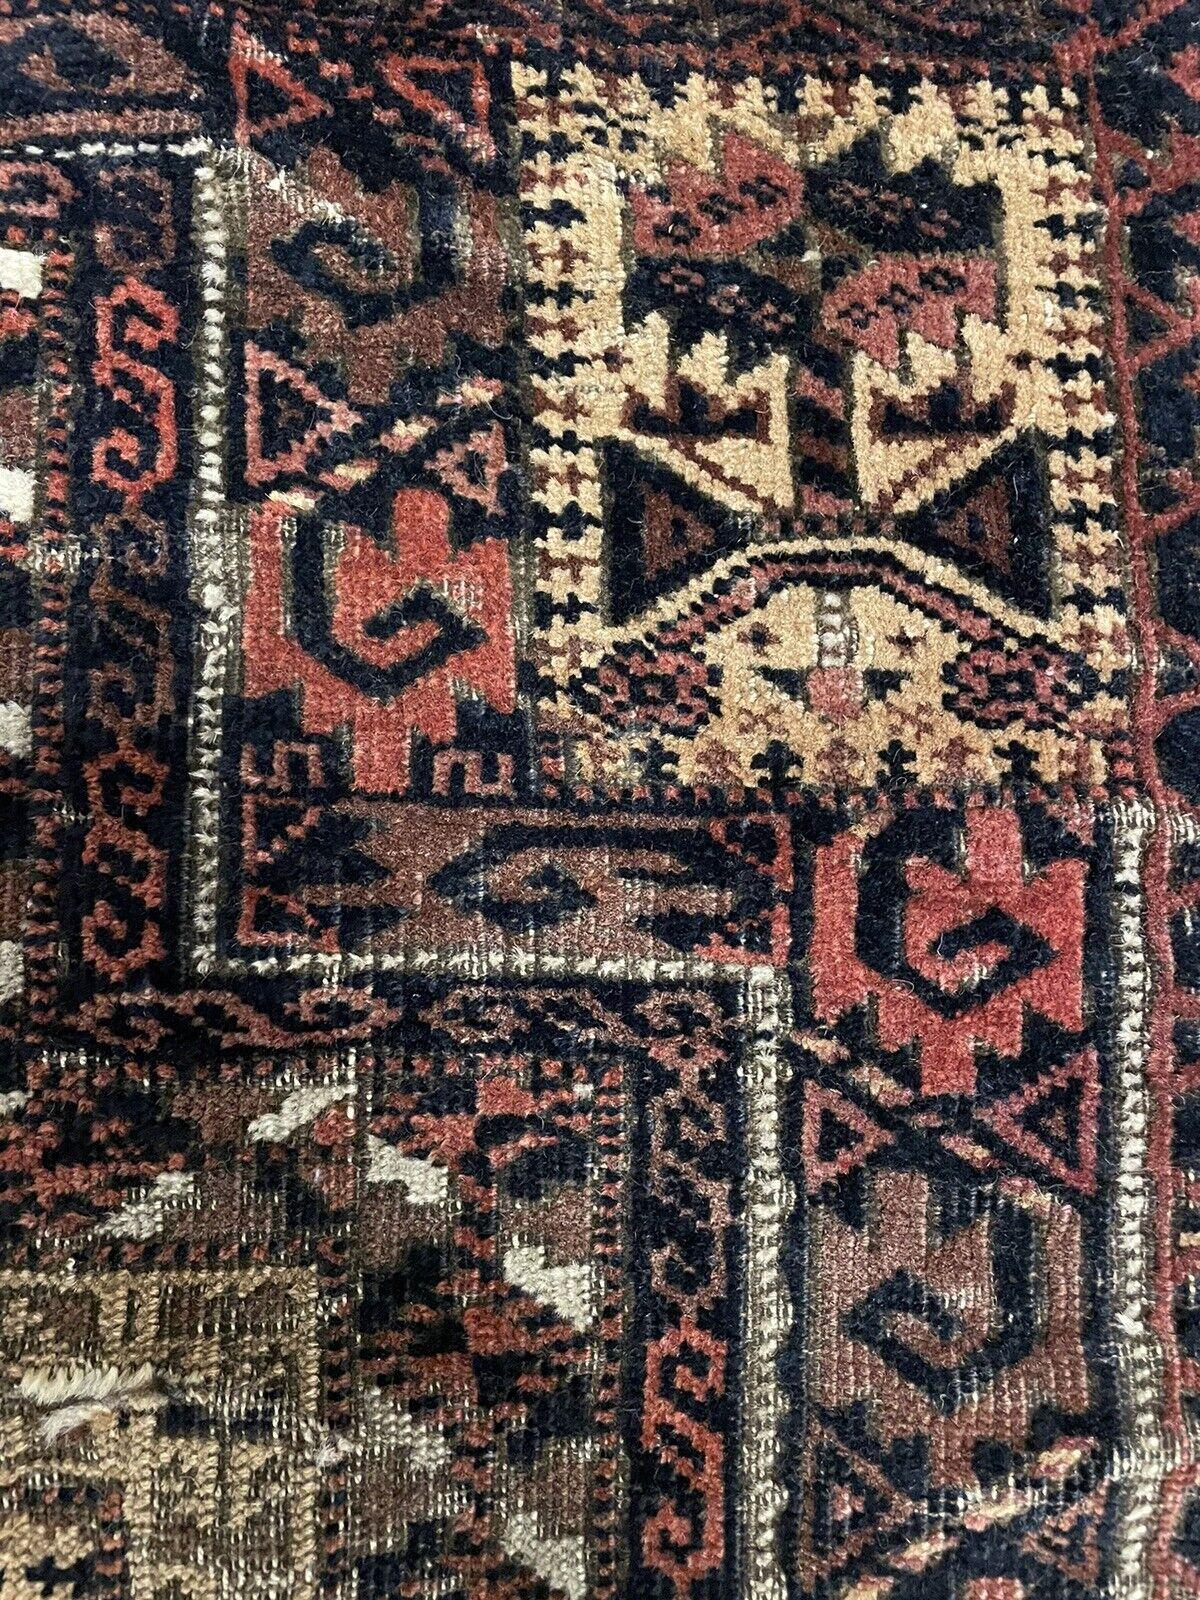 Handmade Antique Afghan Baluch Collectible Rug 2.5' x 4.6', 1880s - 1N18 For Sale 3